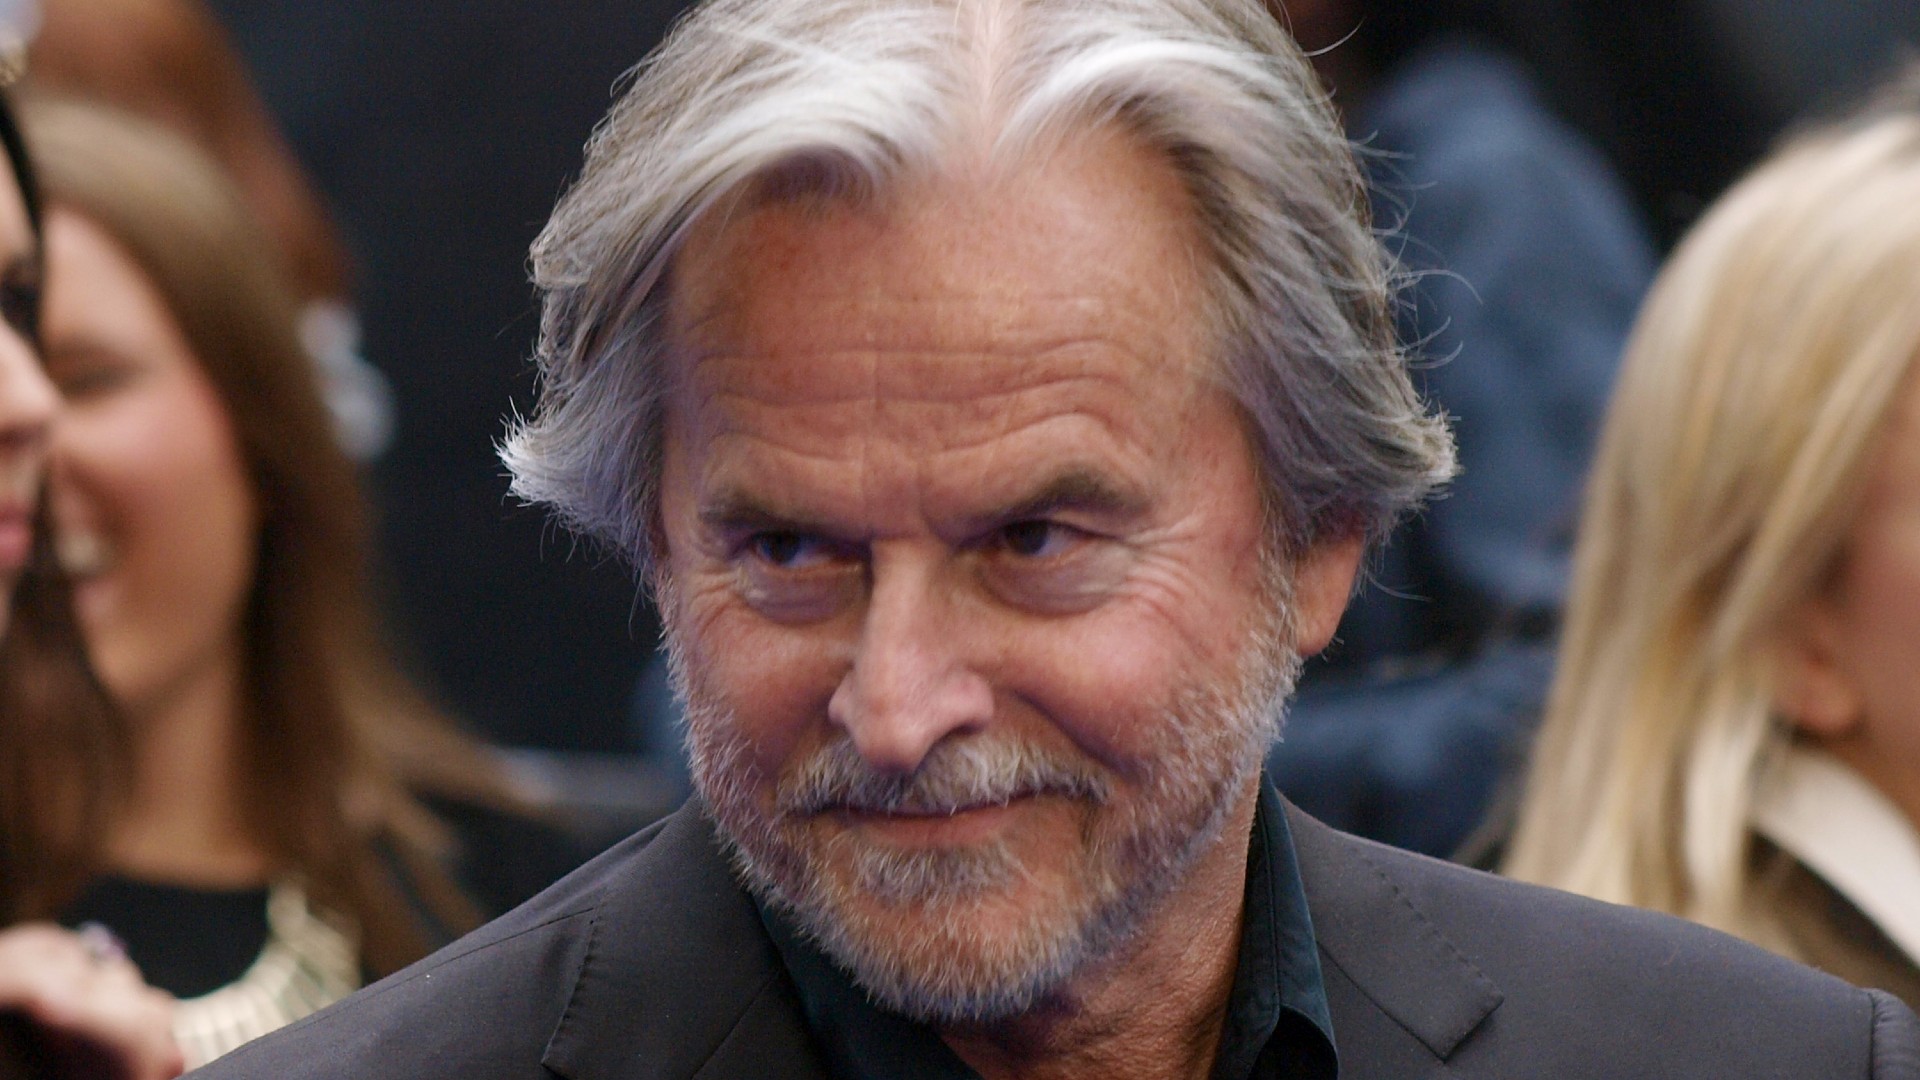 7 TV Roles That Made Us Love 'A Discovery of Witches' Actor Trevor Eve